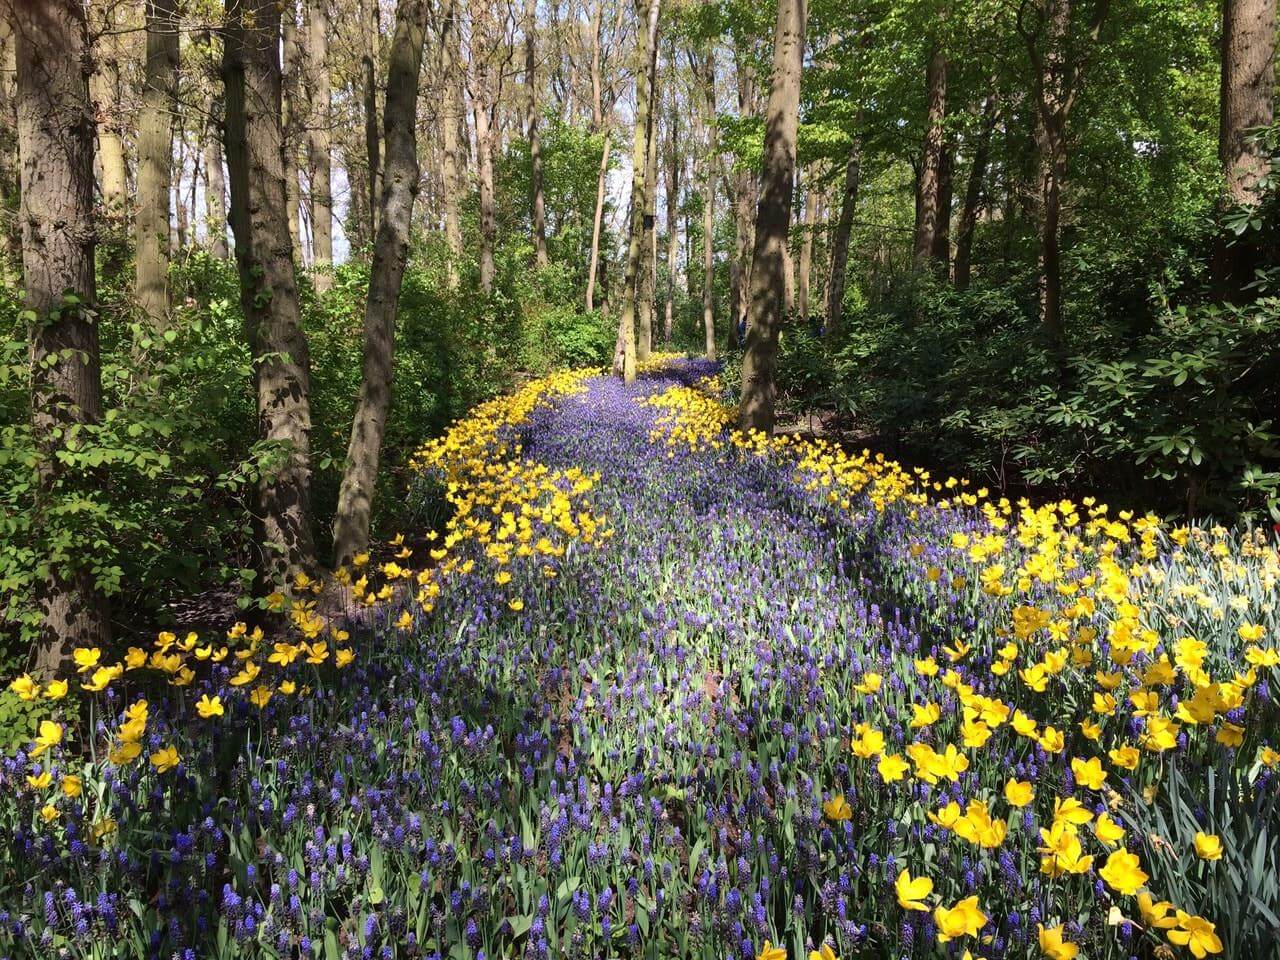 alley entirely covered with purple and yellow flowers in the forest